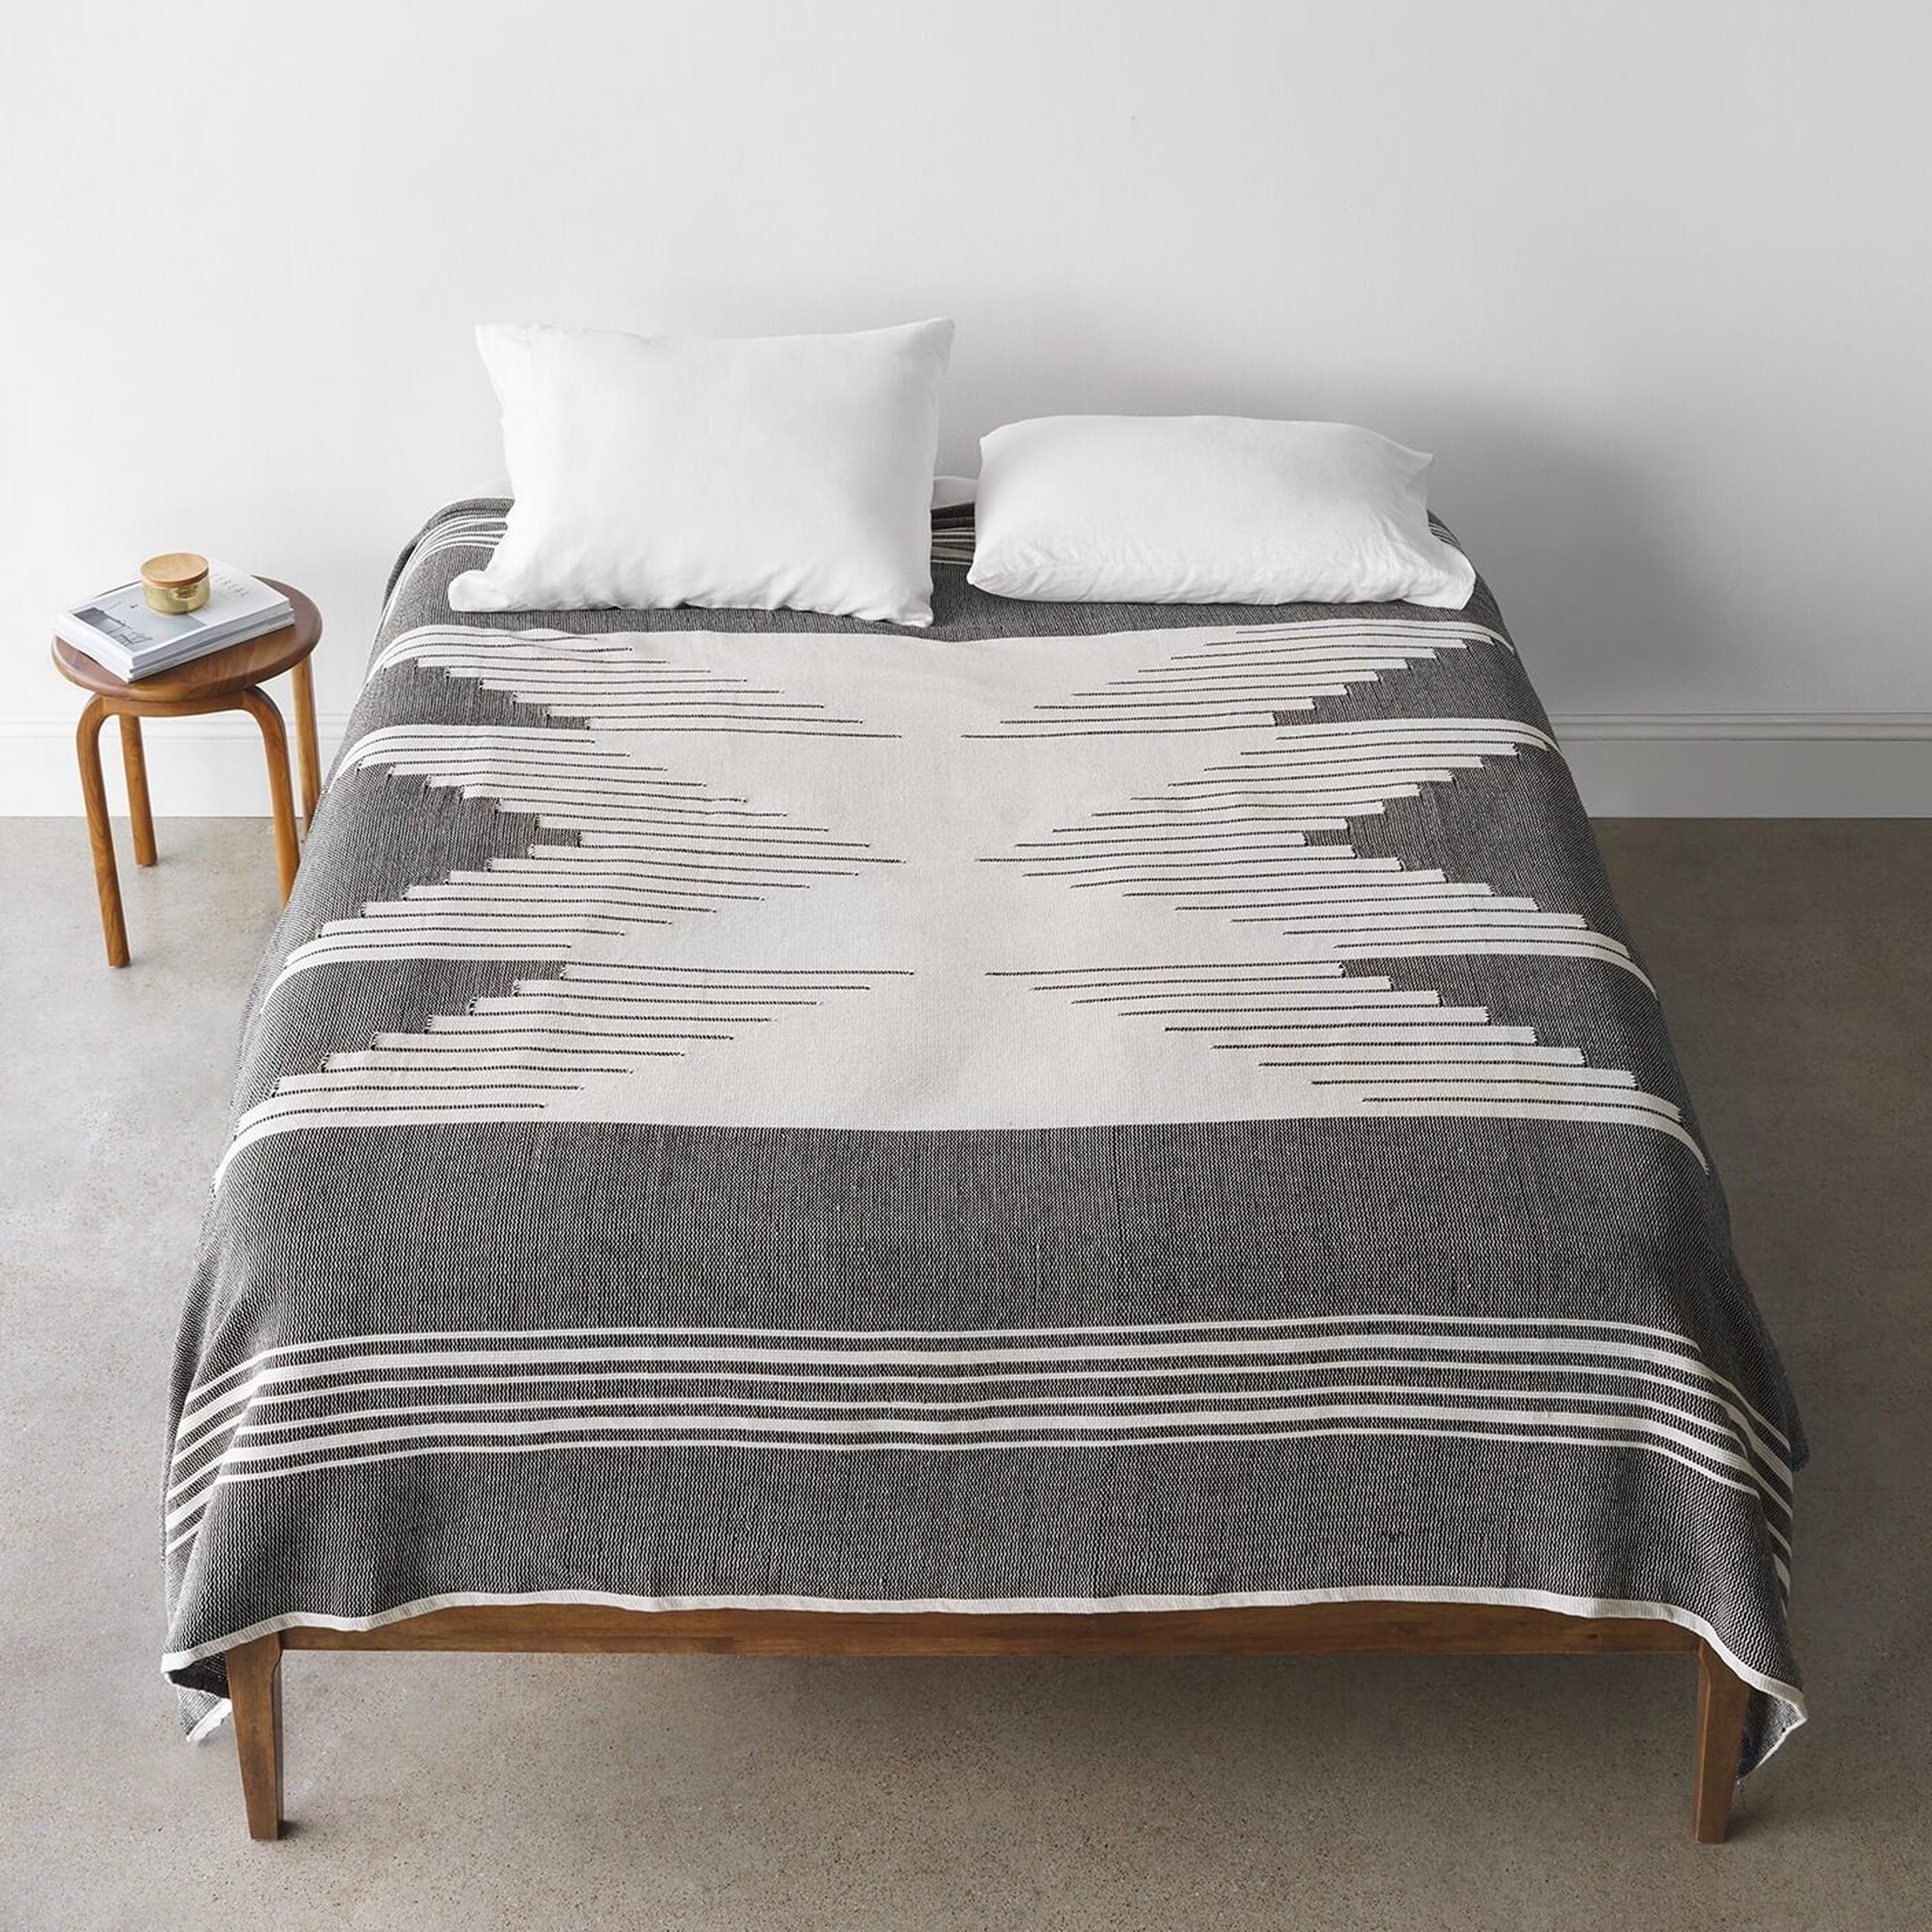 Bico Bed Blanket - Black - King By The Citizenry - The Citizenry